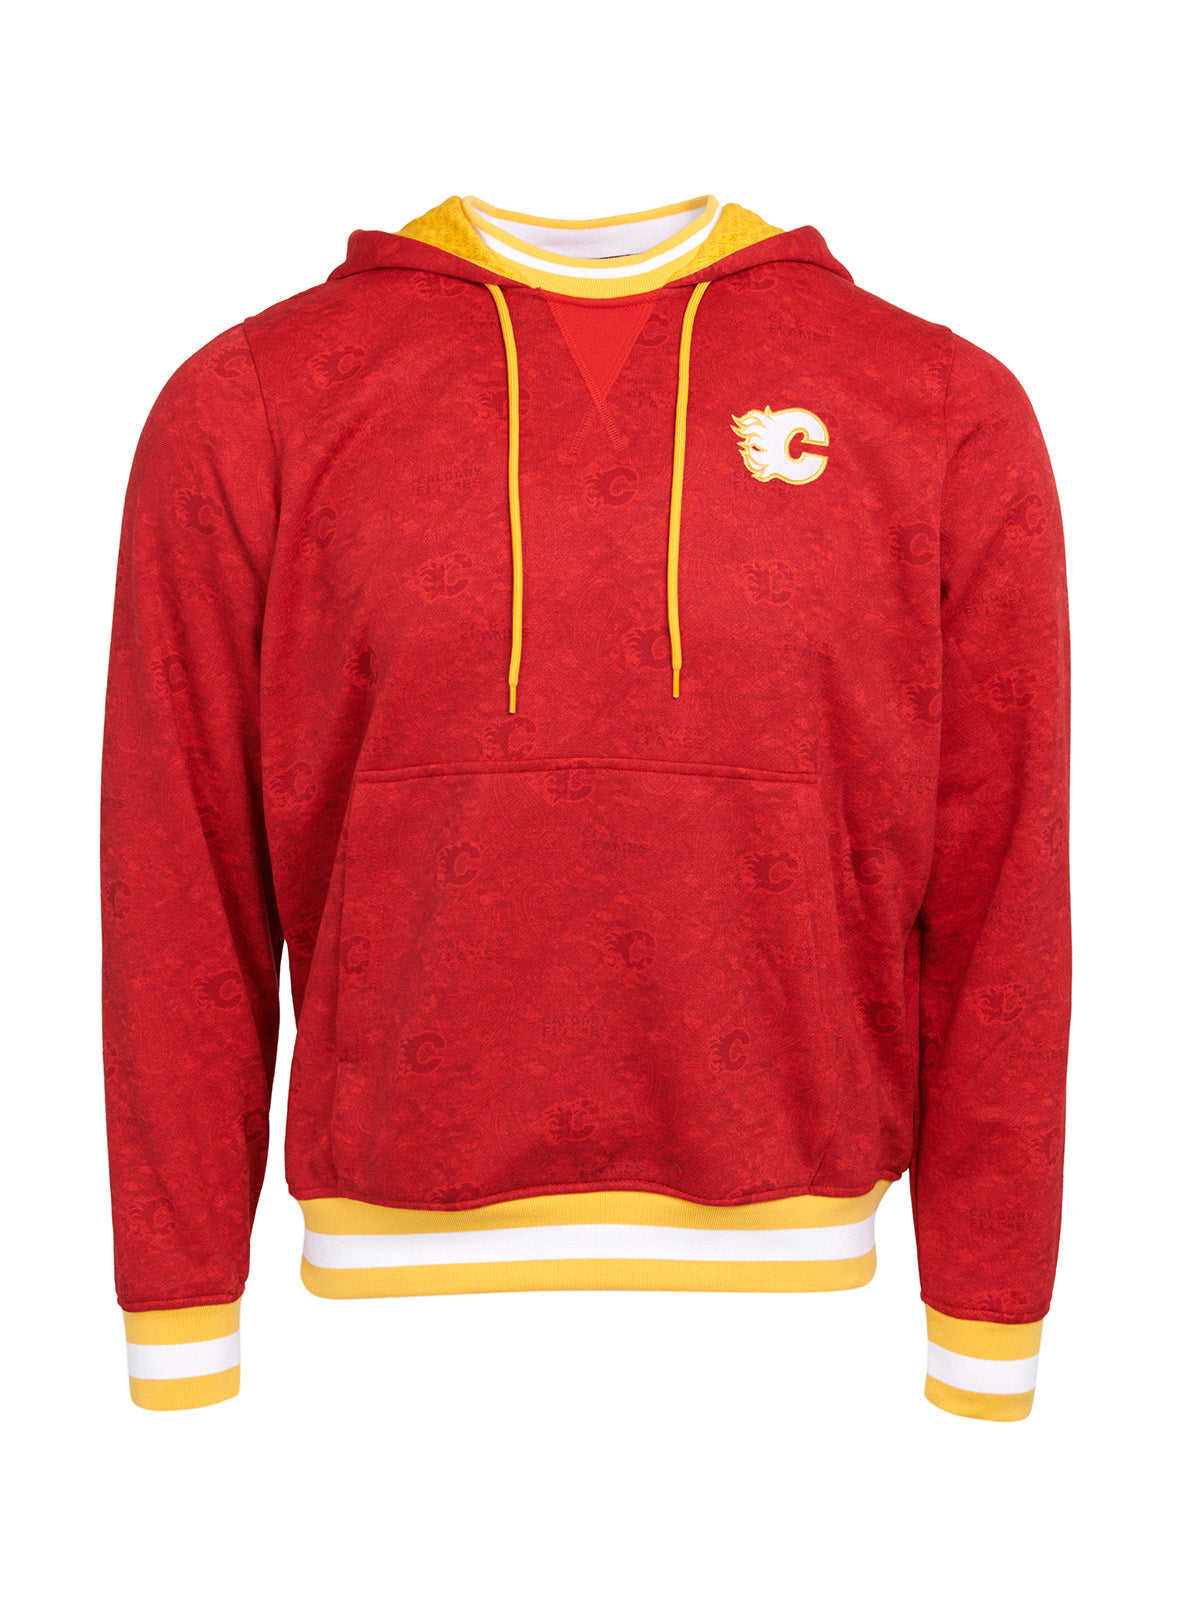 Calgary Flames Hoodie - Show your team spirit, with the iconic team logo patch on the front left chest, and proudly display your Calgary Flames support in their team colors with this NHL hockey hoodie.